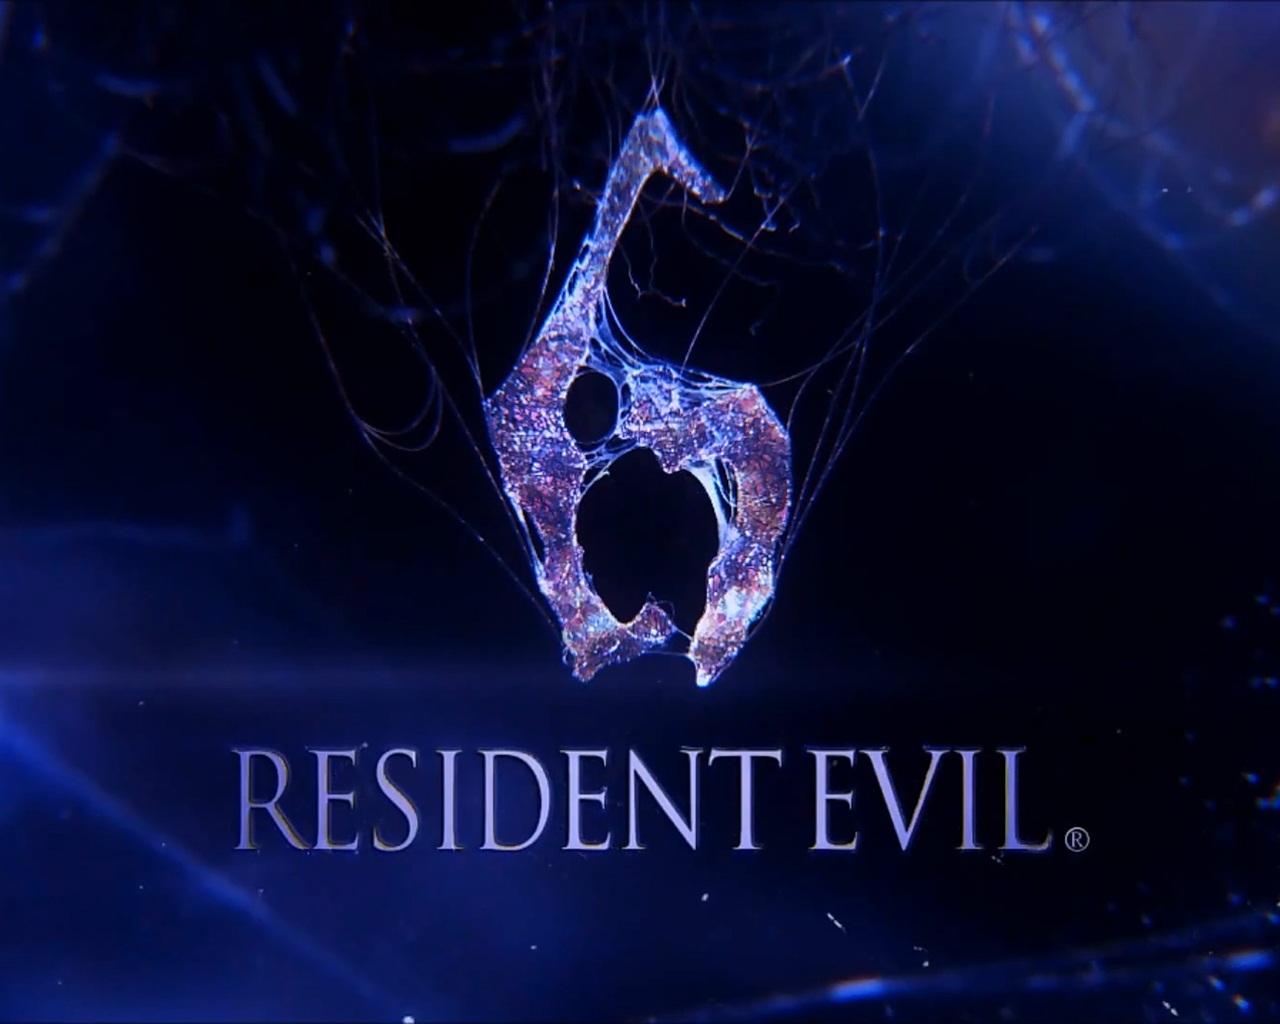 Resident Evil 6 HD game wallpapers #3 - 1280x1024